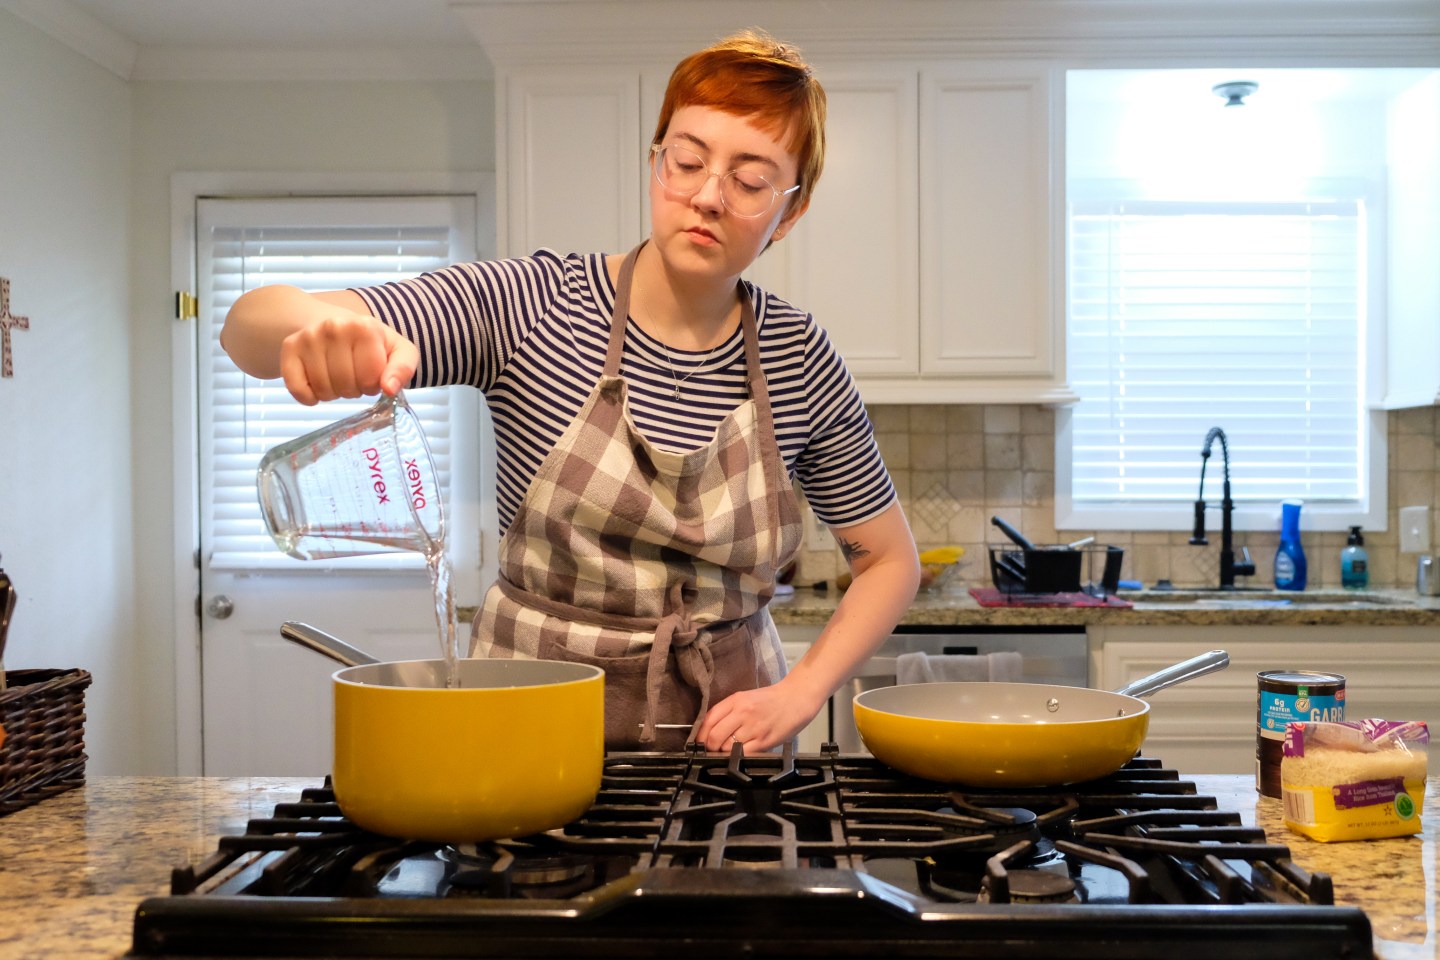 image shows Leah pouring water from glass pyrex into a yellow pot on a stove